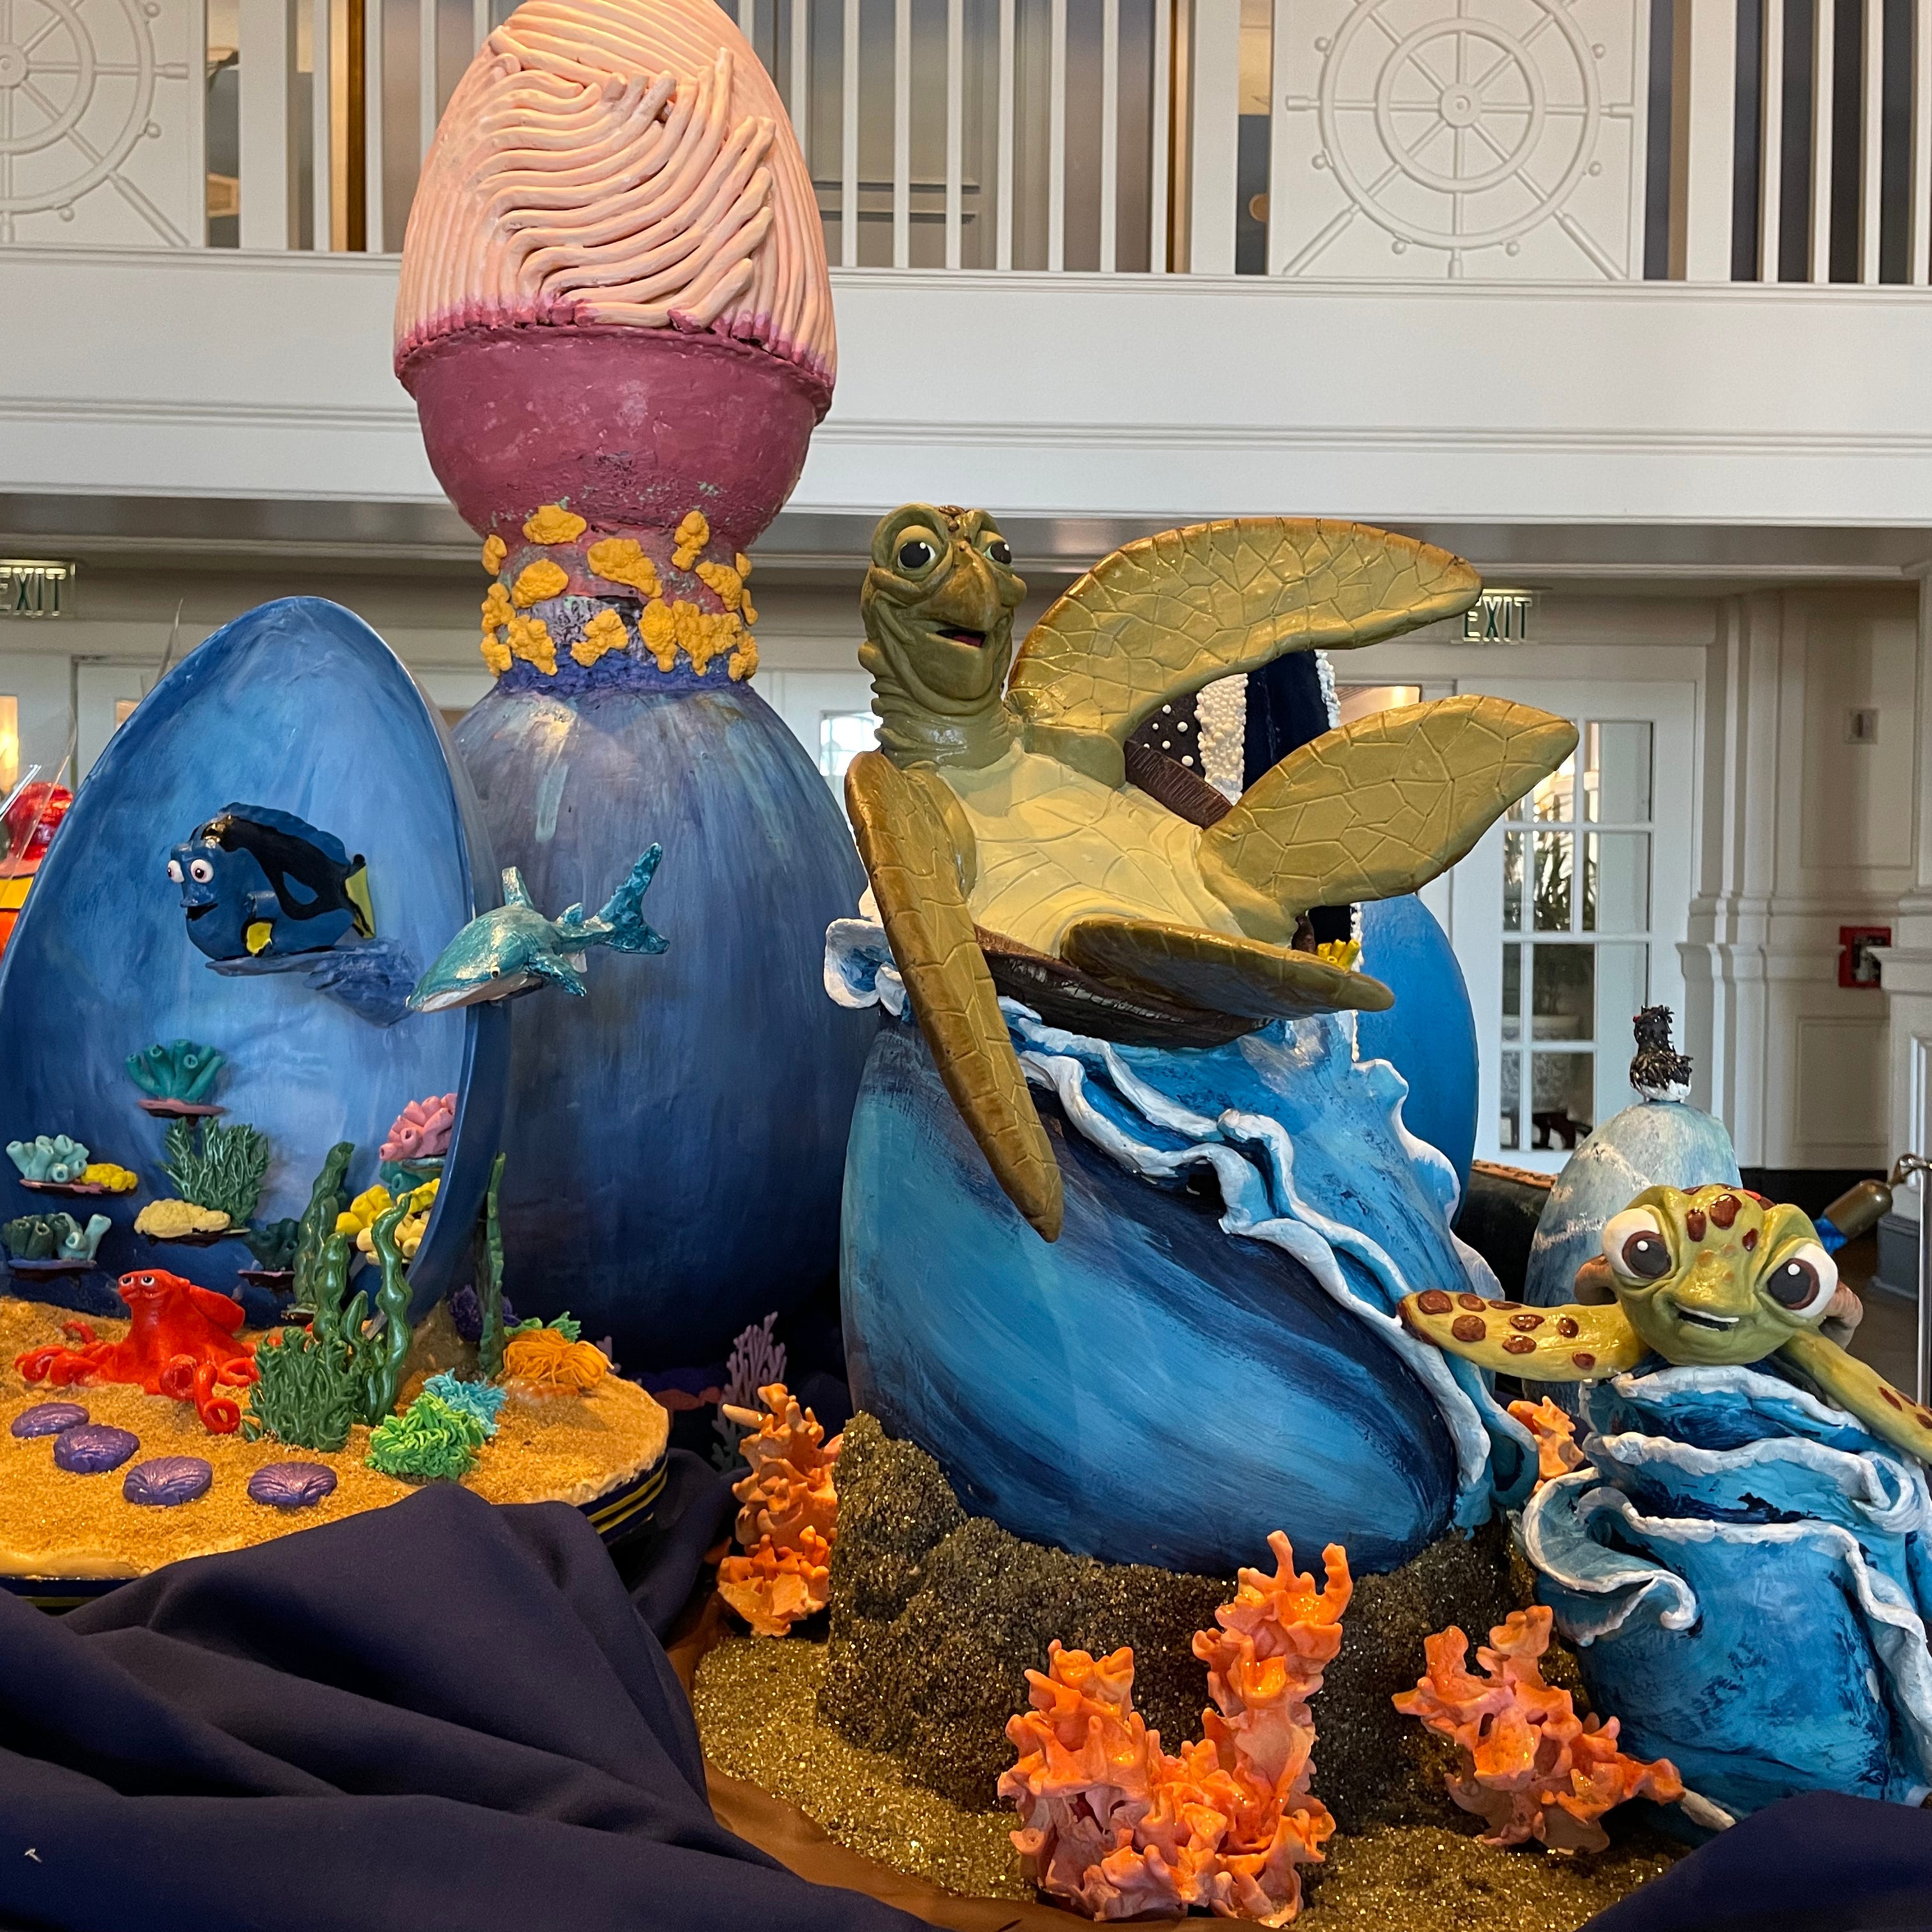 Walt Disney World pastry chefs spend hours intricately decorating Disney-inspired Easter eggs, which guests can see at three different resorts: the Grand Floridian, Contemporary, and Yacht & Beach Club.